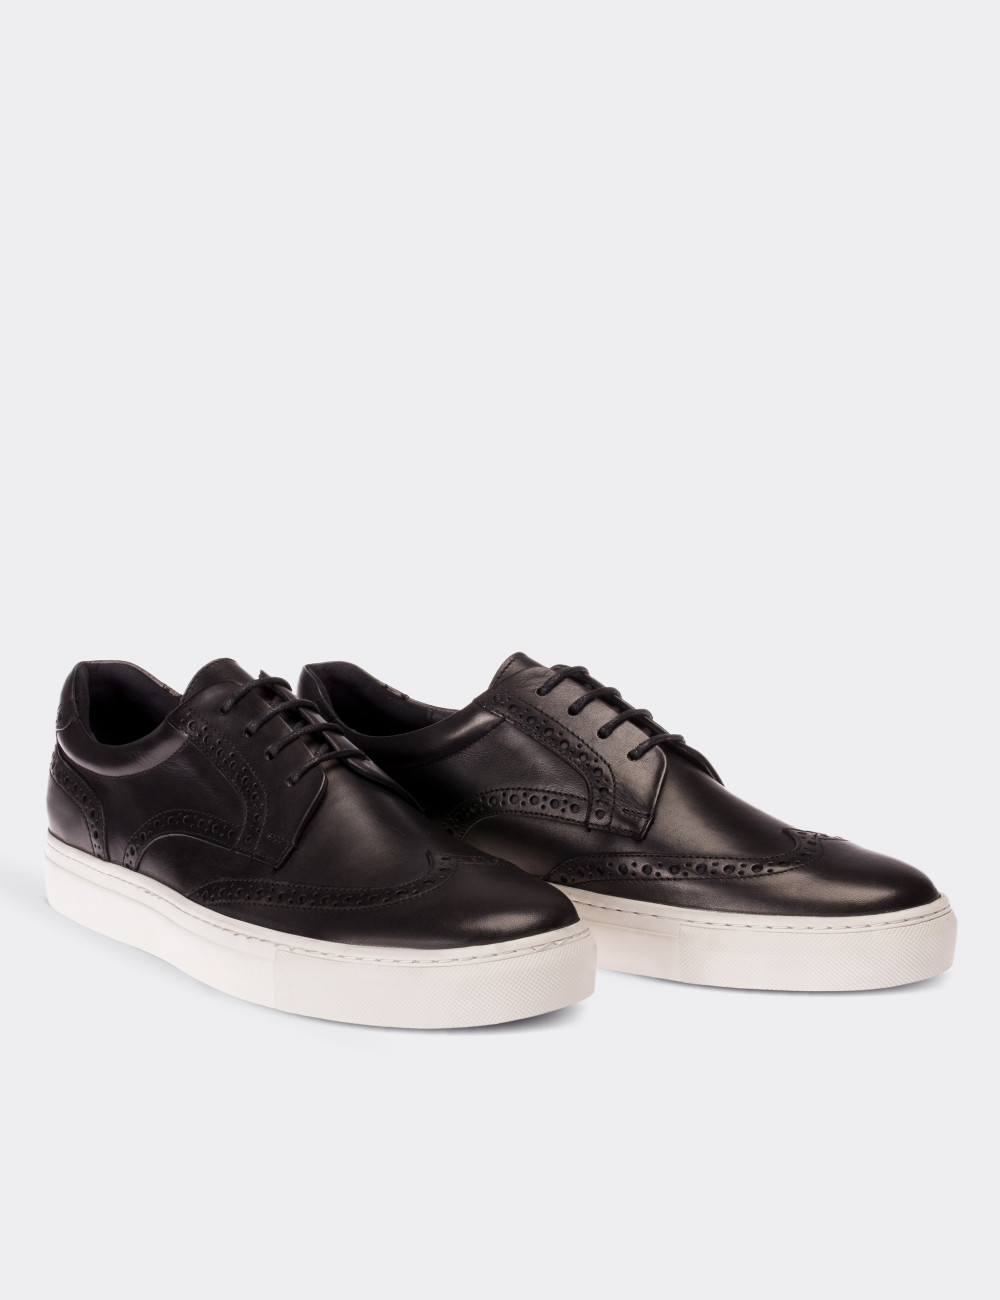 Black  Leather  Sneakers - 01691MSYHC01